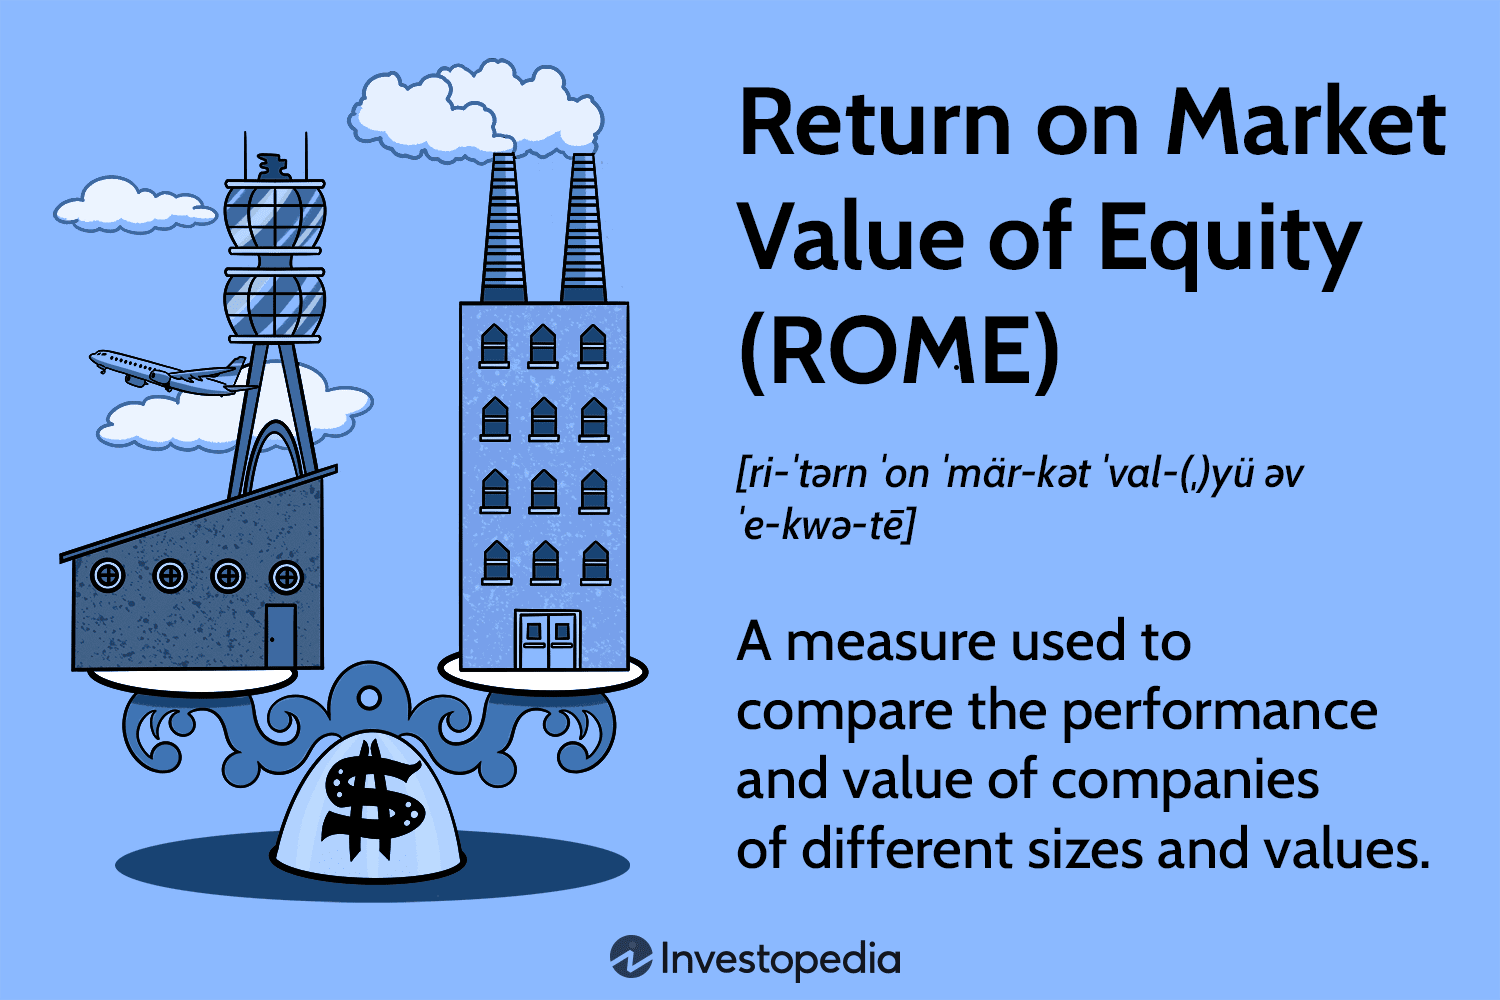 Market Value of Equity